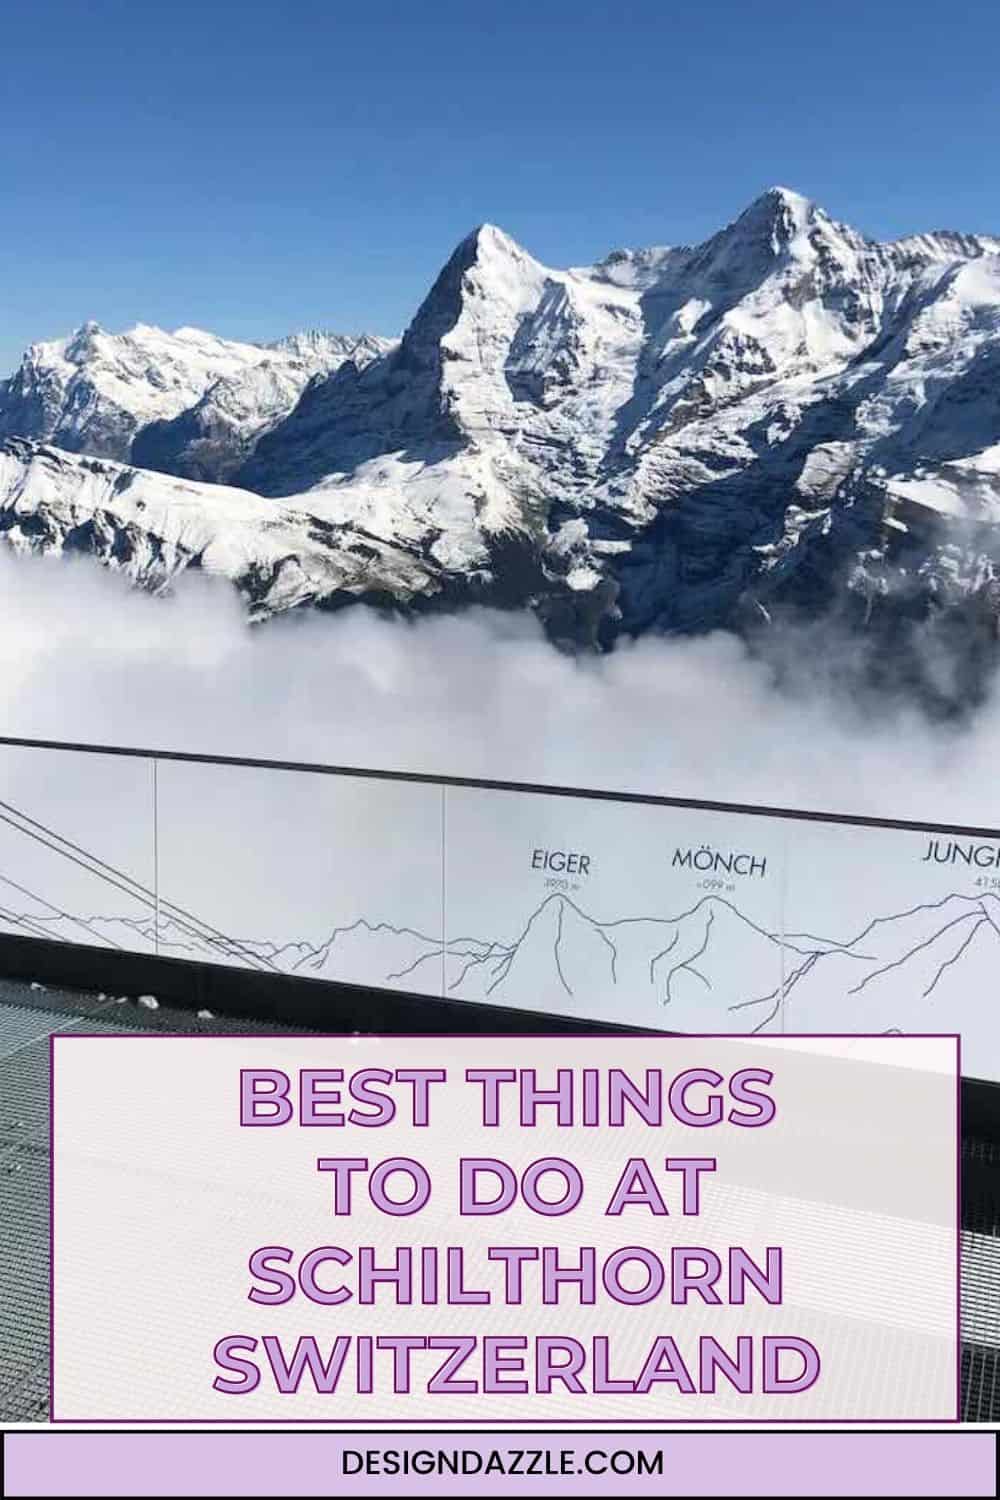 Best Things to Do at Schilthorn Switzerland